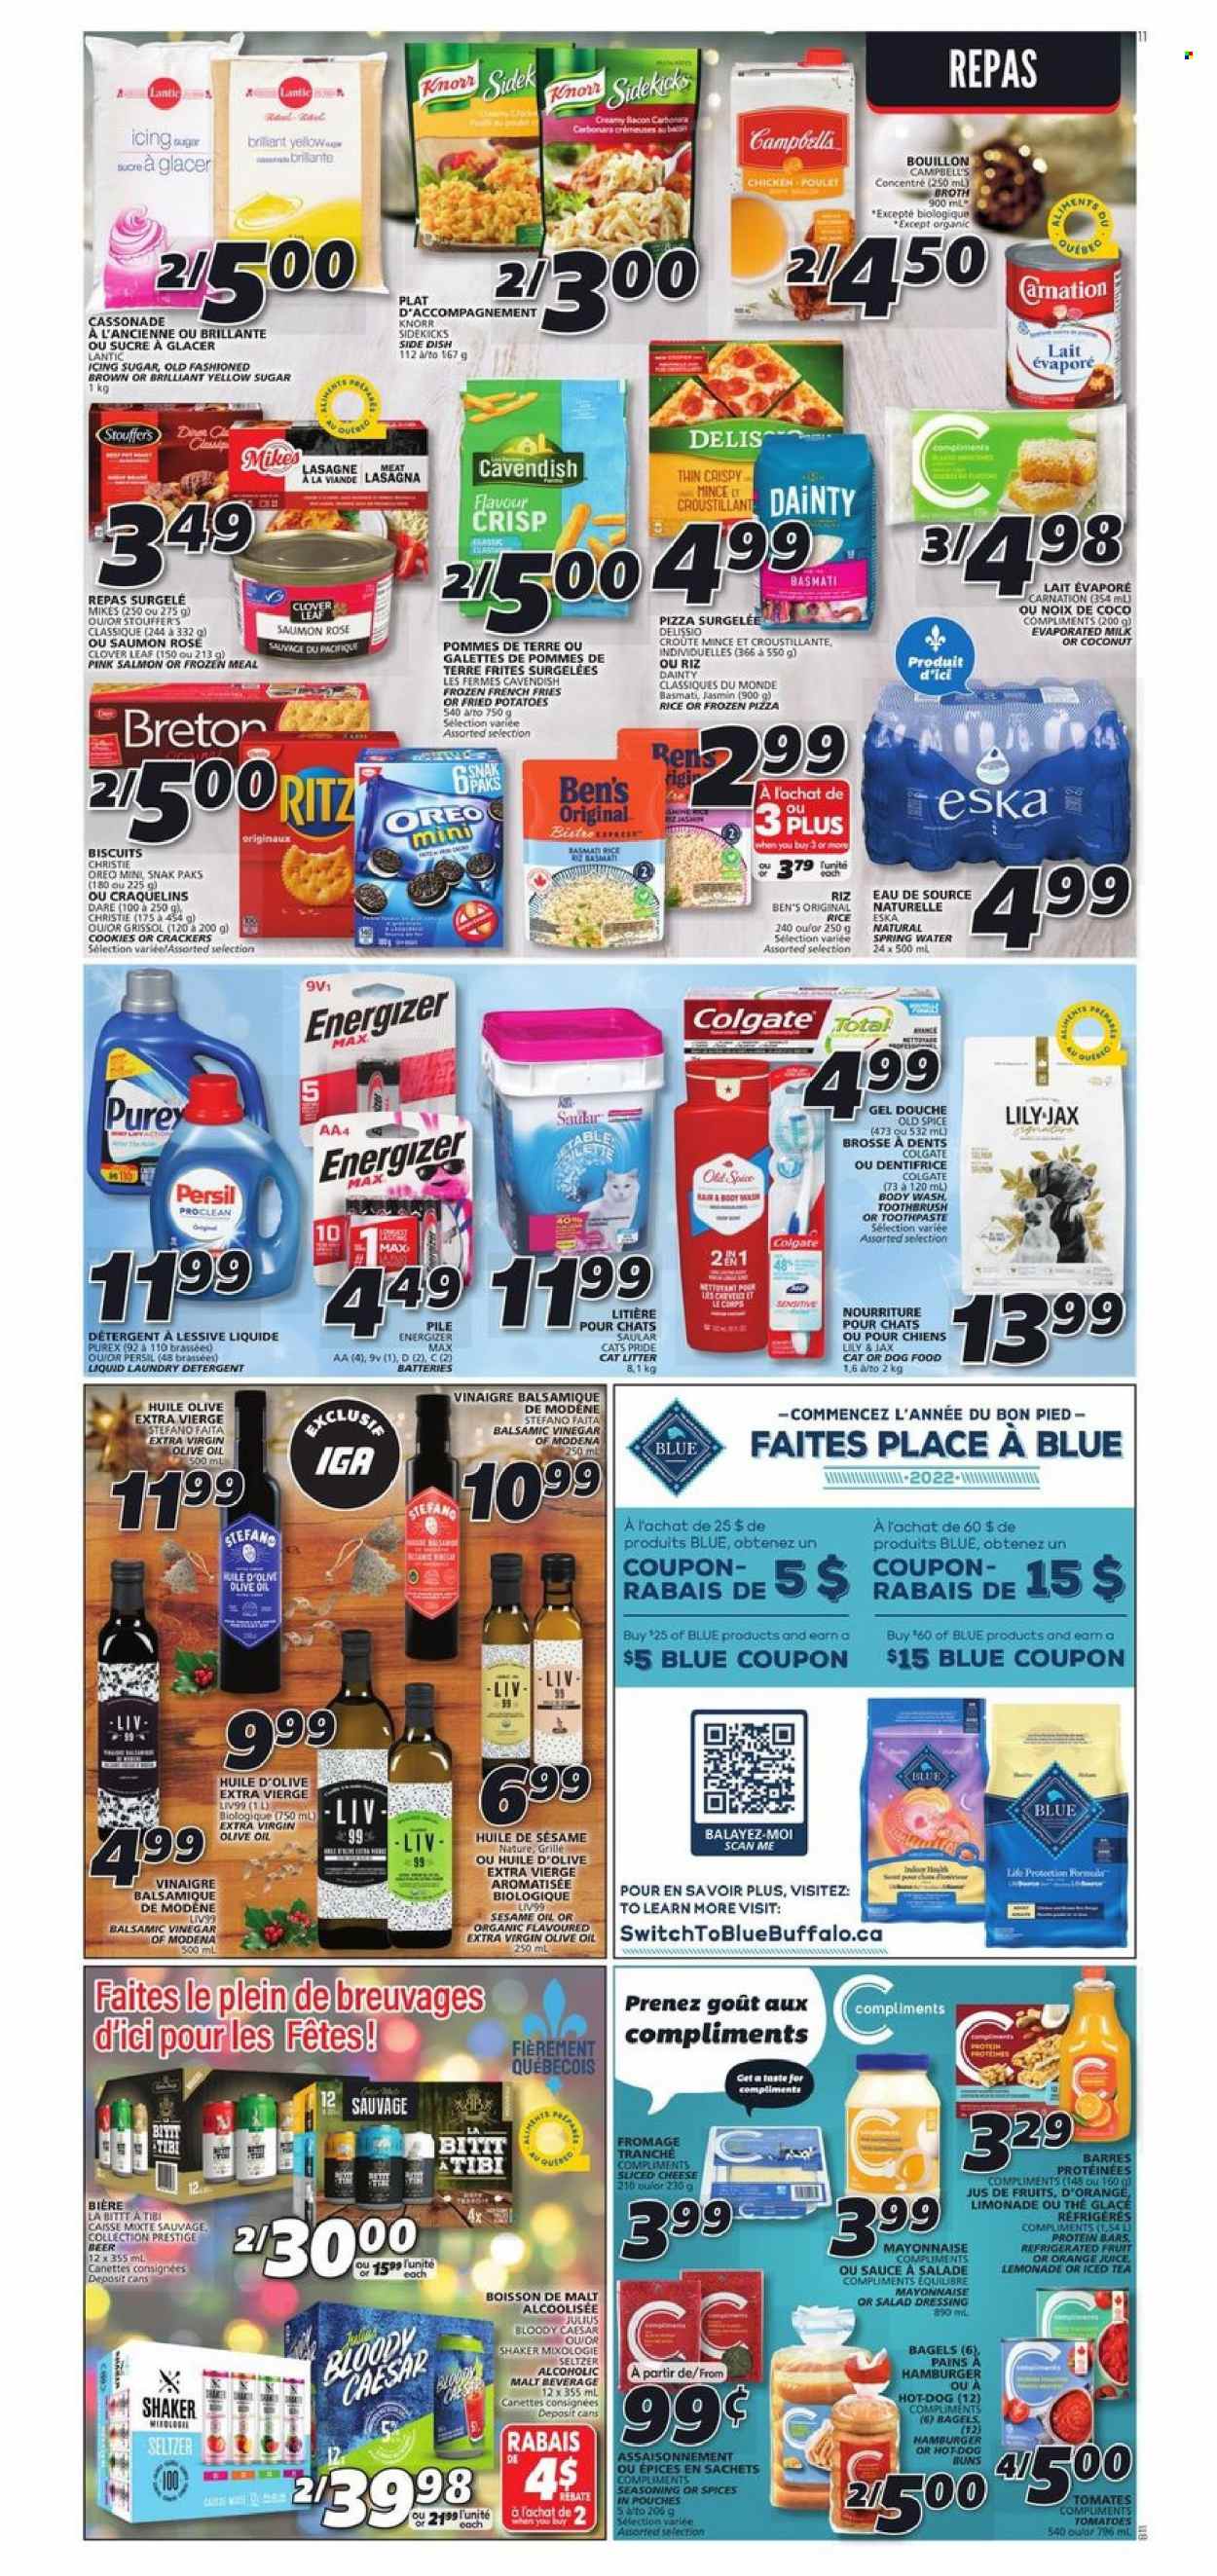 thumbnail - IGA Flyer - December 30, 2021 - January 05, 2022 - Sales products - bagels, buns, potatoes, Campbell's, pizza, hamburger, sauce, lasagna meal, bacon, sliced cheese, Clover, evaporated milk, mayonnaise, Stouffer's, potato fries, french fries, cookies, crackers, biscuit, bouillon, sugar, icing sugar, malt, protein bar, basmati rice, spice, salad dressing, dressing, balsamic vinegar, extra virgin olive oil, vinegar, olive oil, oil, lemonade, ice tea, seltzer water, spring water, rosé wine, beer, Knorr, Oreo, Energizer, Colgate, Old Spice, oranges. Page 8.